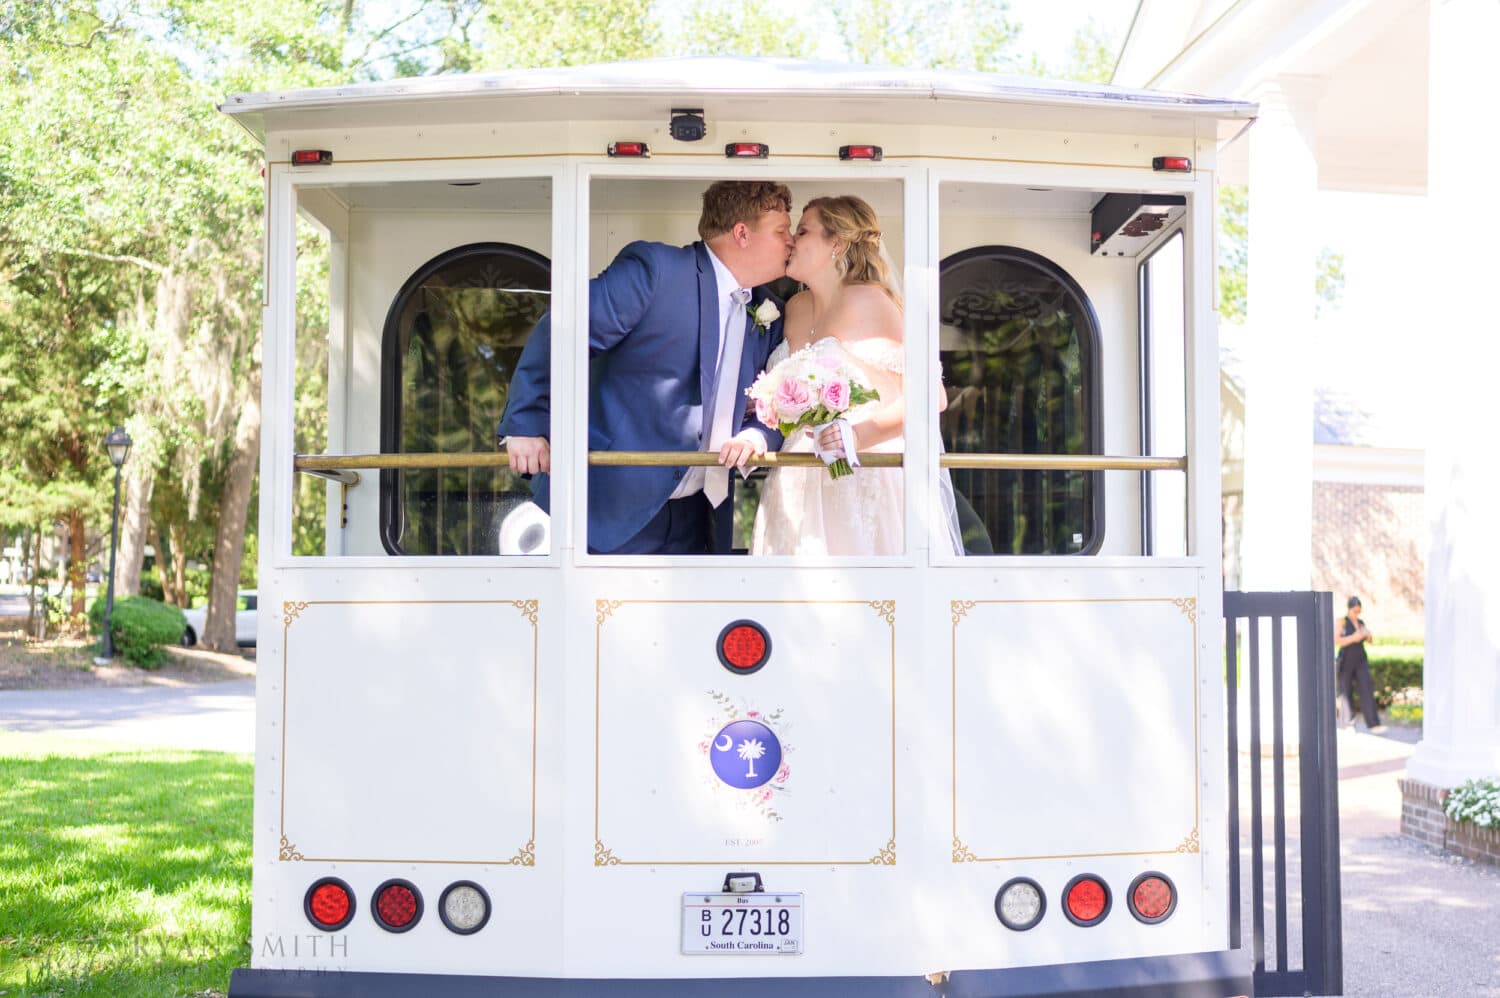 Bride and groom on the back of the trolley  - Pawleys Plantation